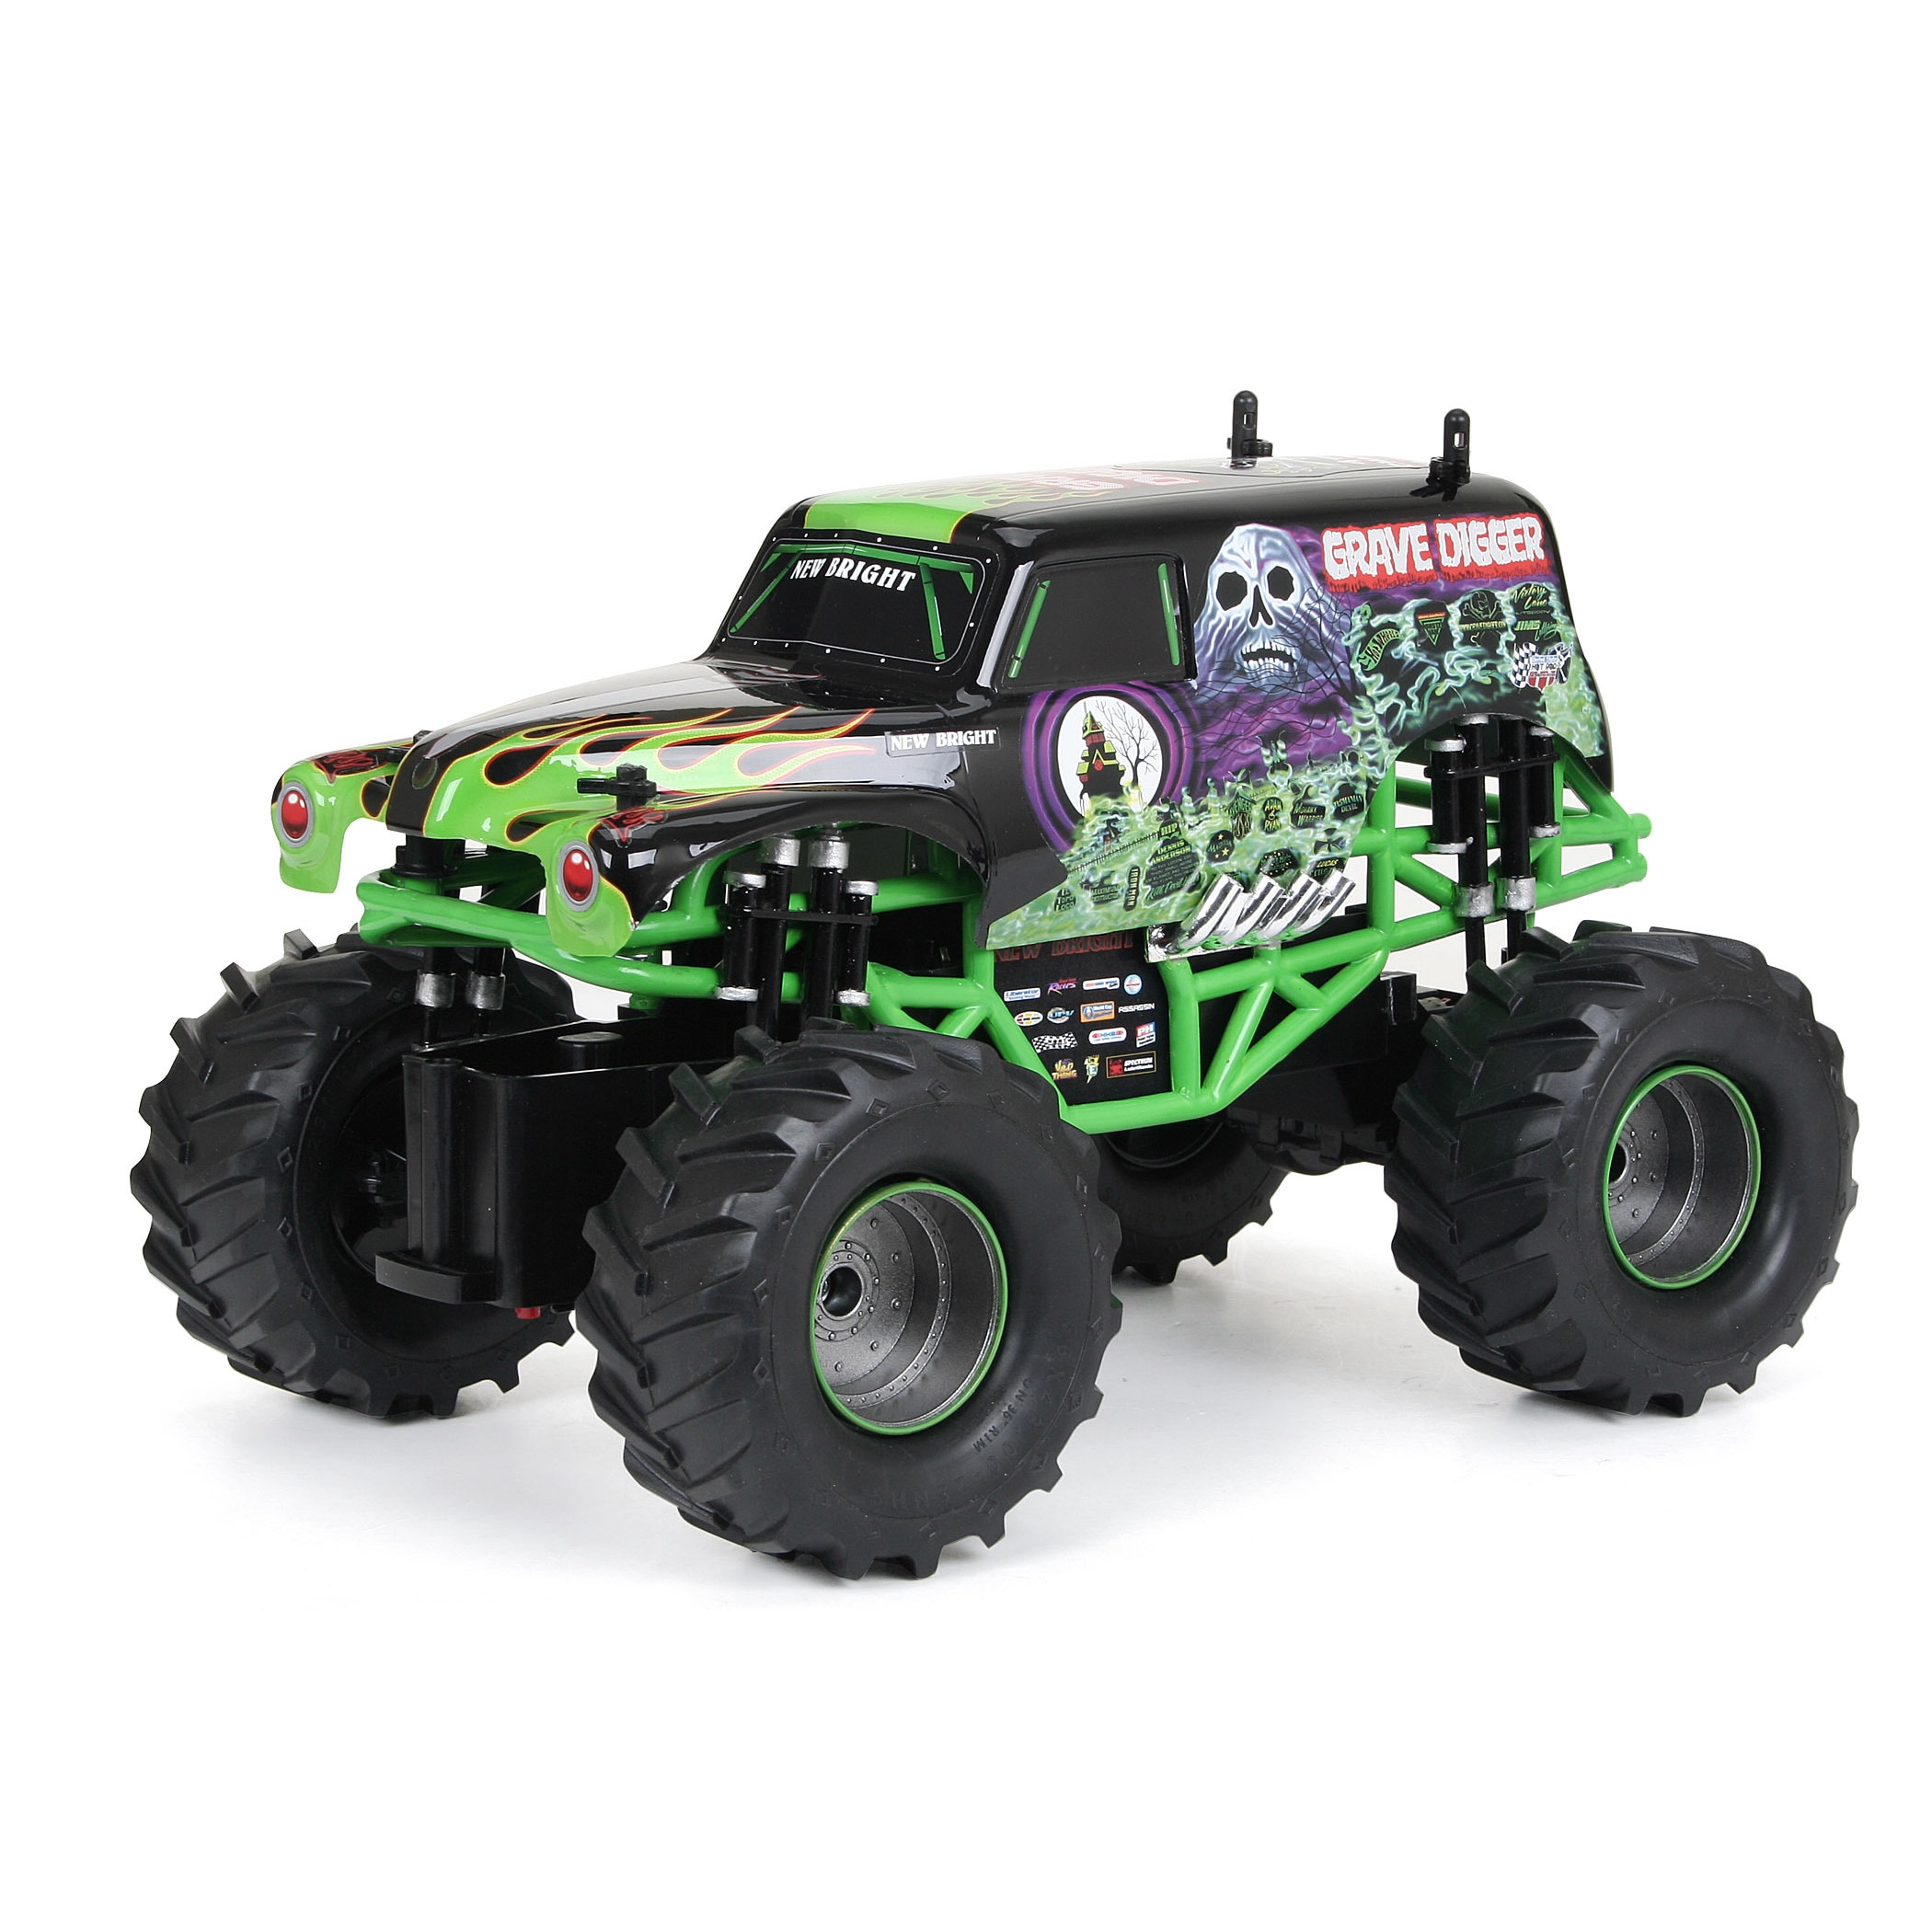 rc zombie monster truck